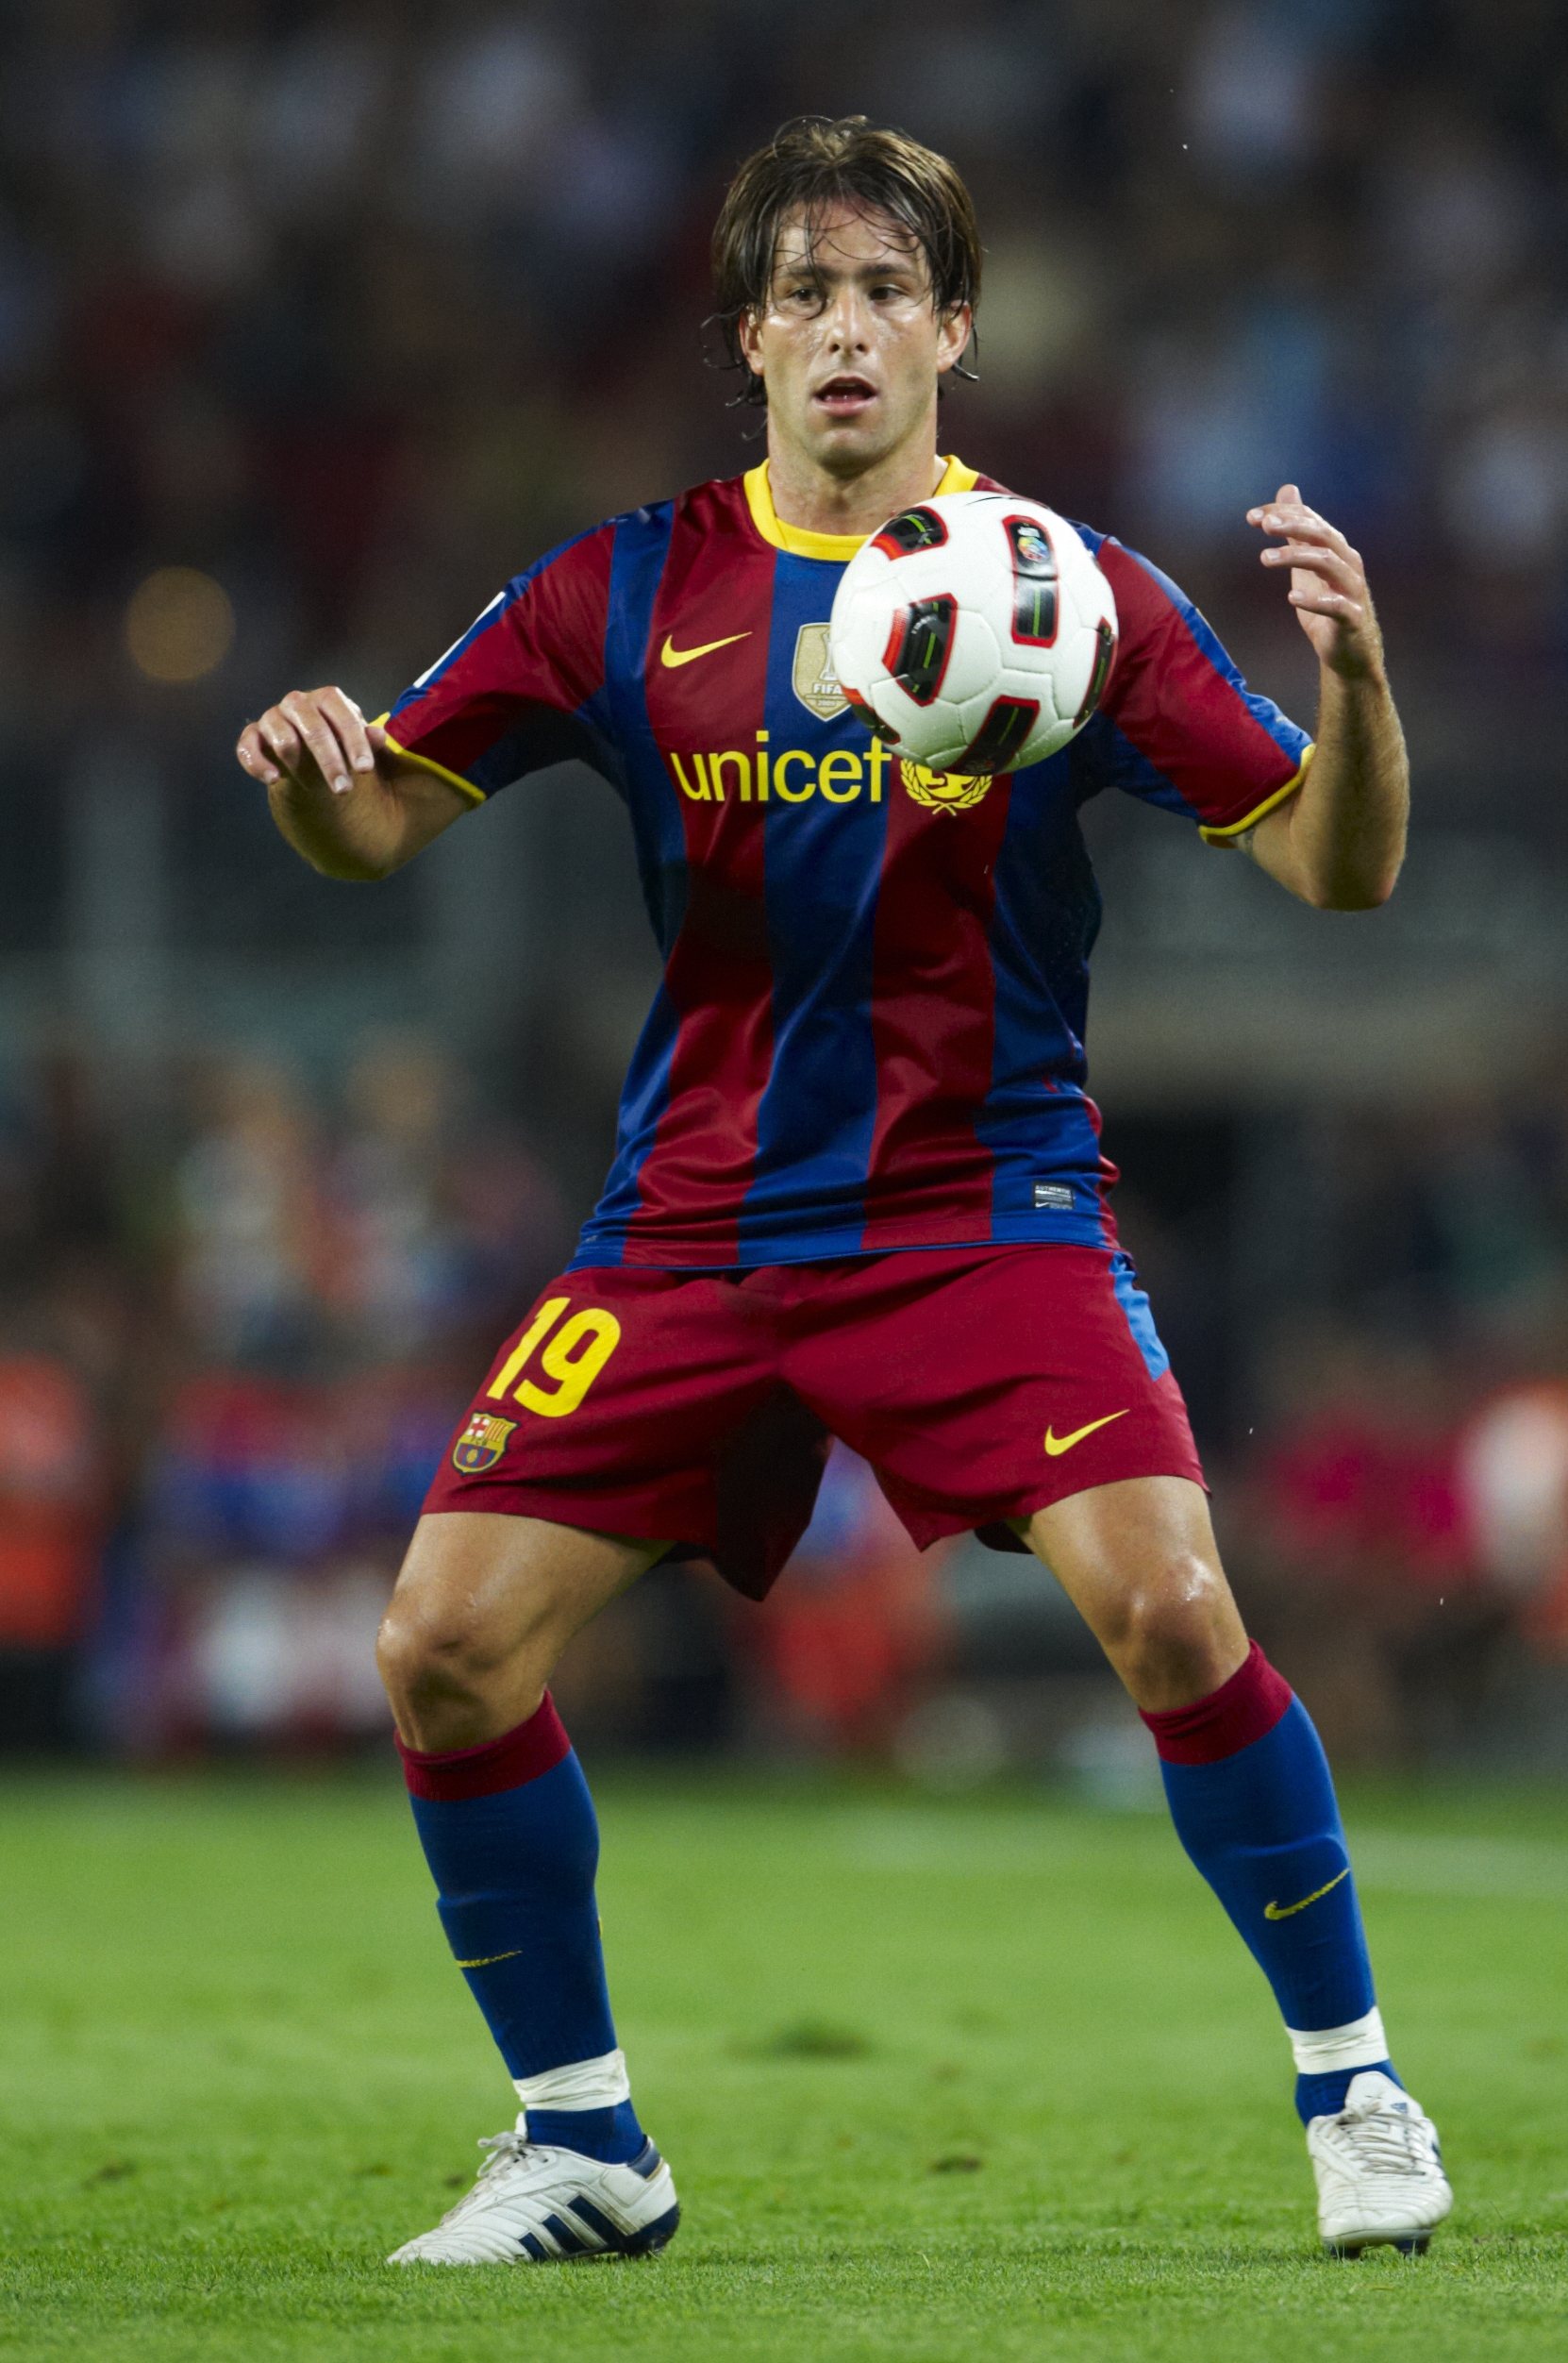 BARCELONA, SPAIN - SEPTEMBER 22:  Maxwell of Barcelona controls the ball during the La Liga match between Barcelona and Sporting de Gijon at Nou Camp on September 22, 2010 in Barcelona, Spain. Barcelona won 1-0.  (Photo by Manuel Queimadelos Alonso/Getty 